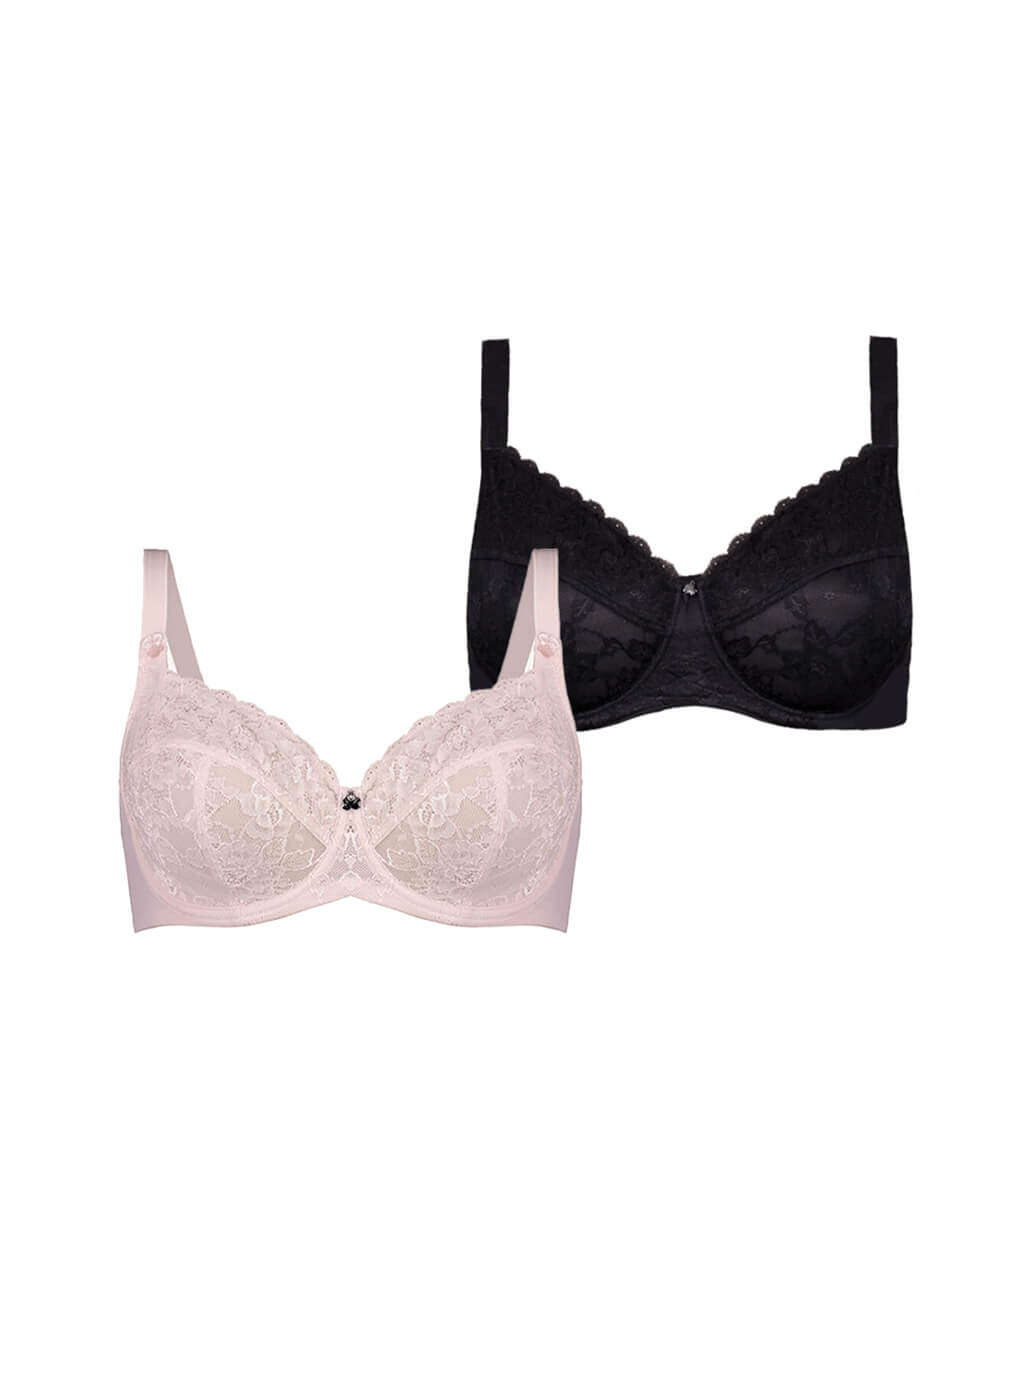 Dahlia Lace Full Cup Bras(2 Pack) - Black and Pink Smoke